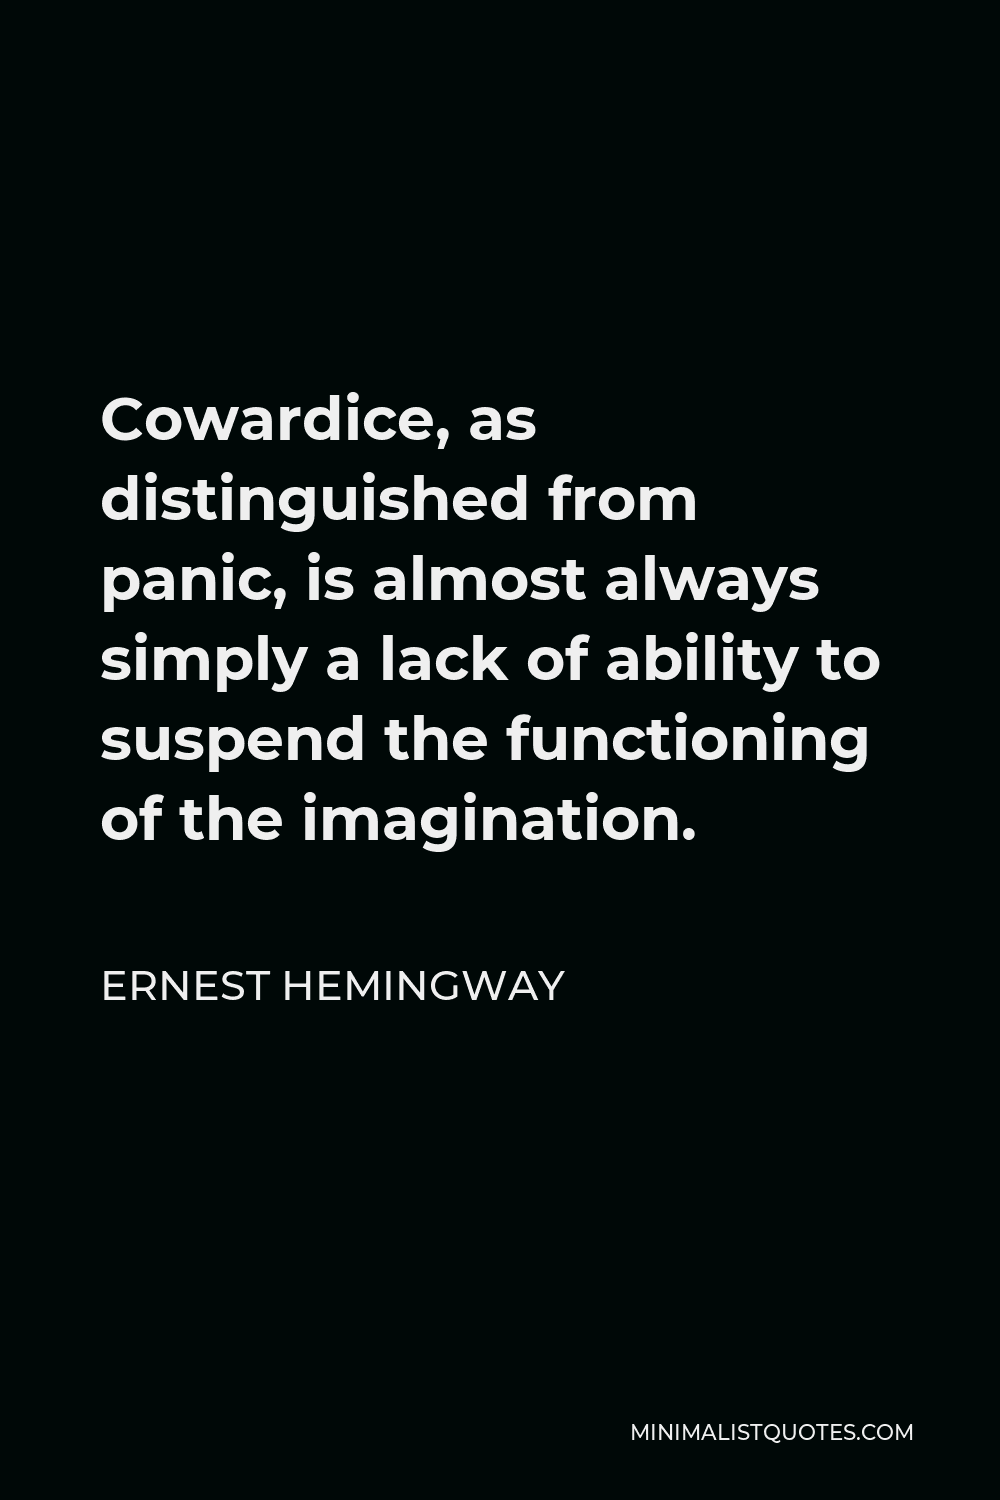 Ernest Hemingway Quote - Cowardice, as distinguished from panic, is almost always simply a lack of ability to suspend the functioning of the imagination.